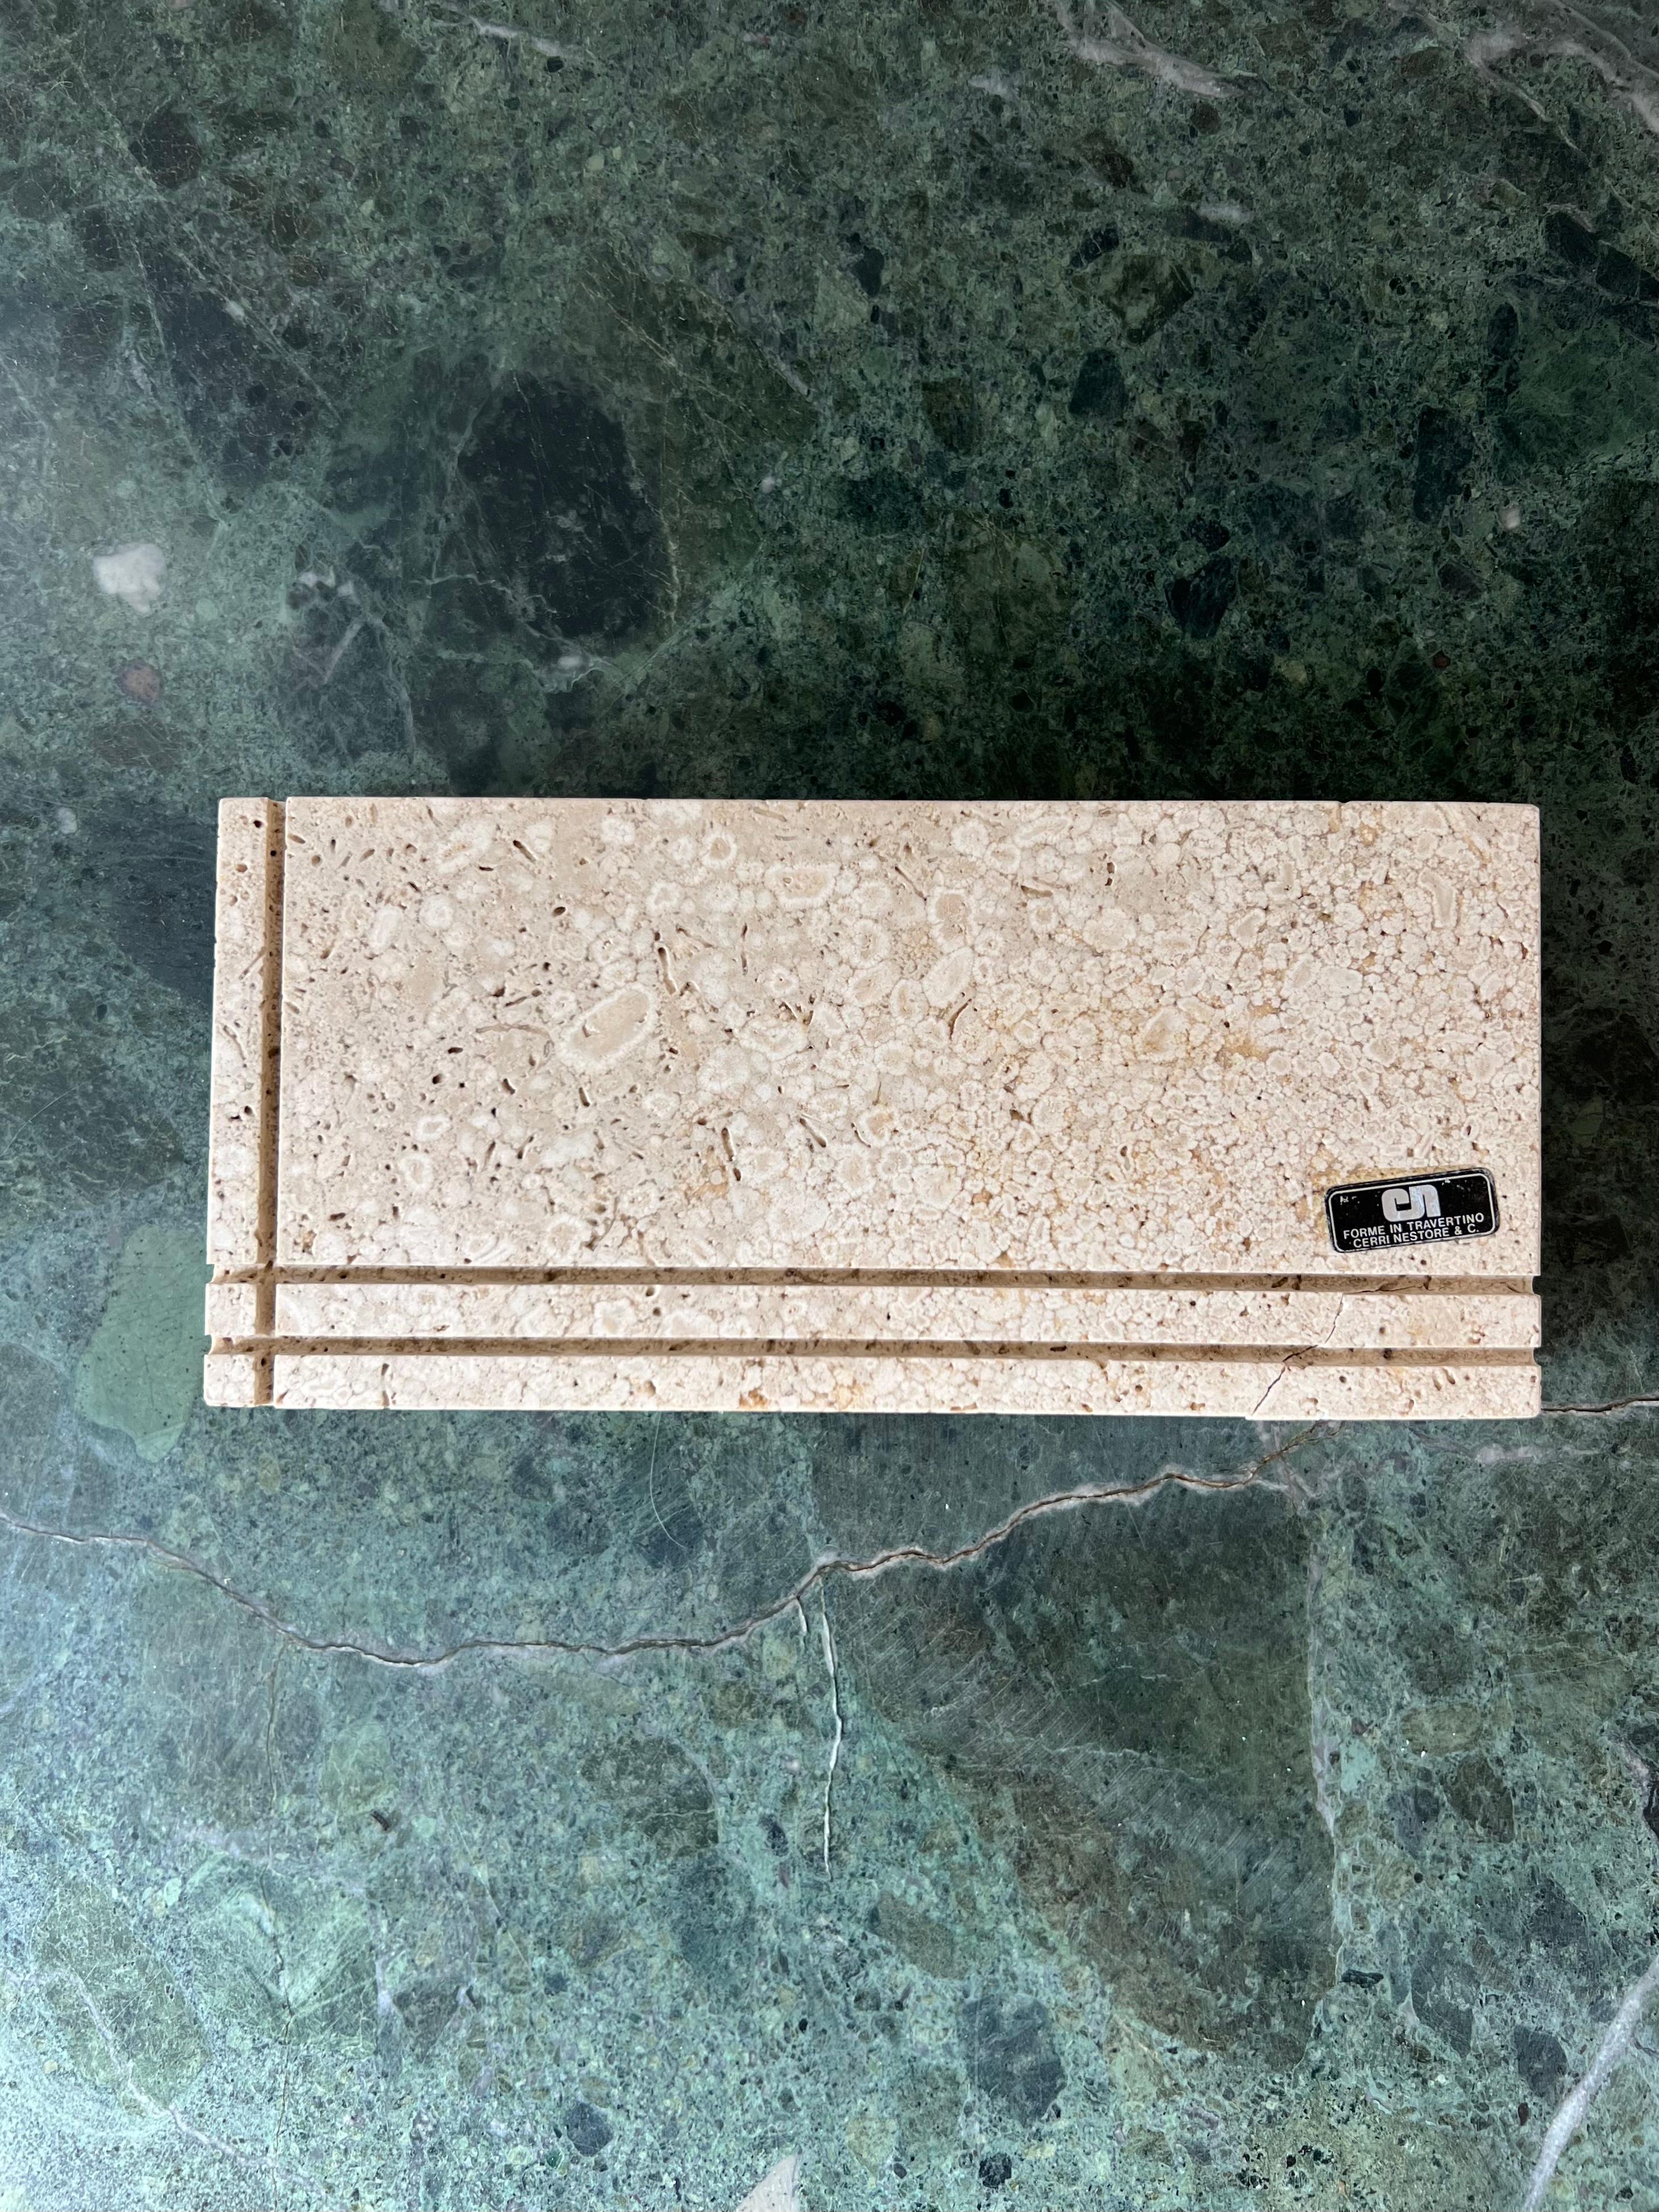 A vintage Italian travertine box by Cerri Nestore, 1970s. Unique geometric lines classic to Nestore accent the top. This item was hand-crafted in Italy so elements of the construction are visible. The travertine is raw, rather than polished or